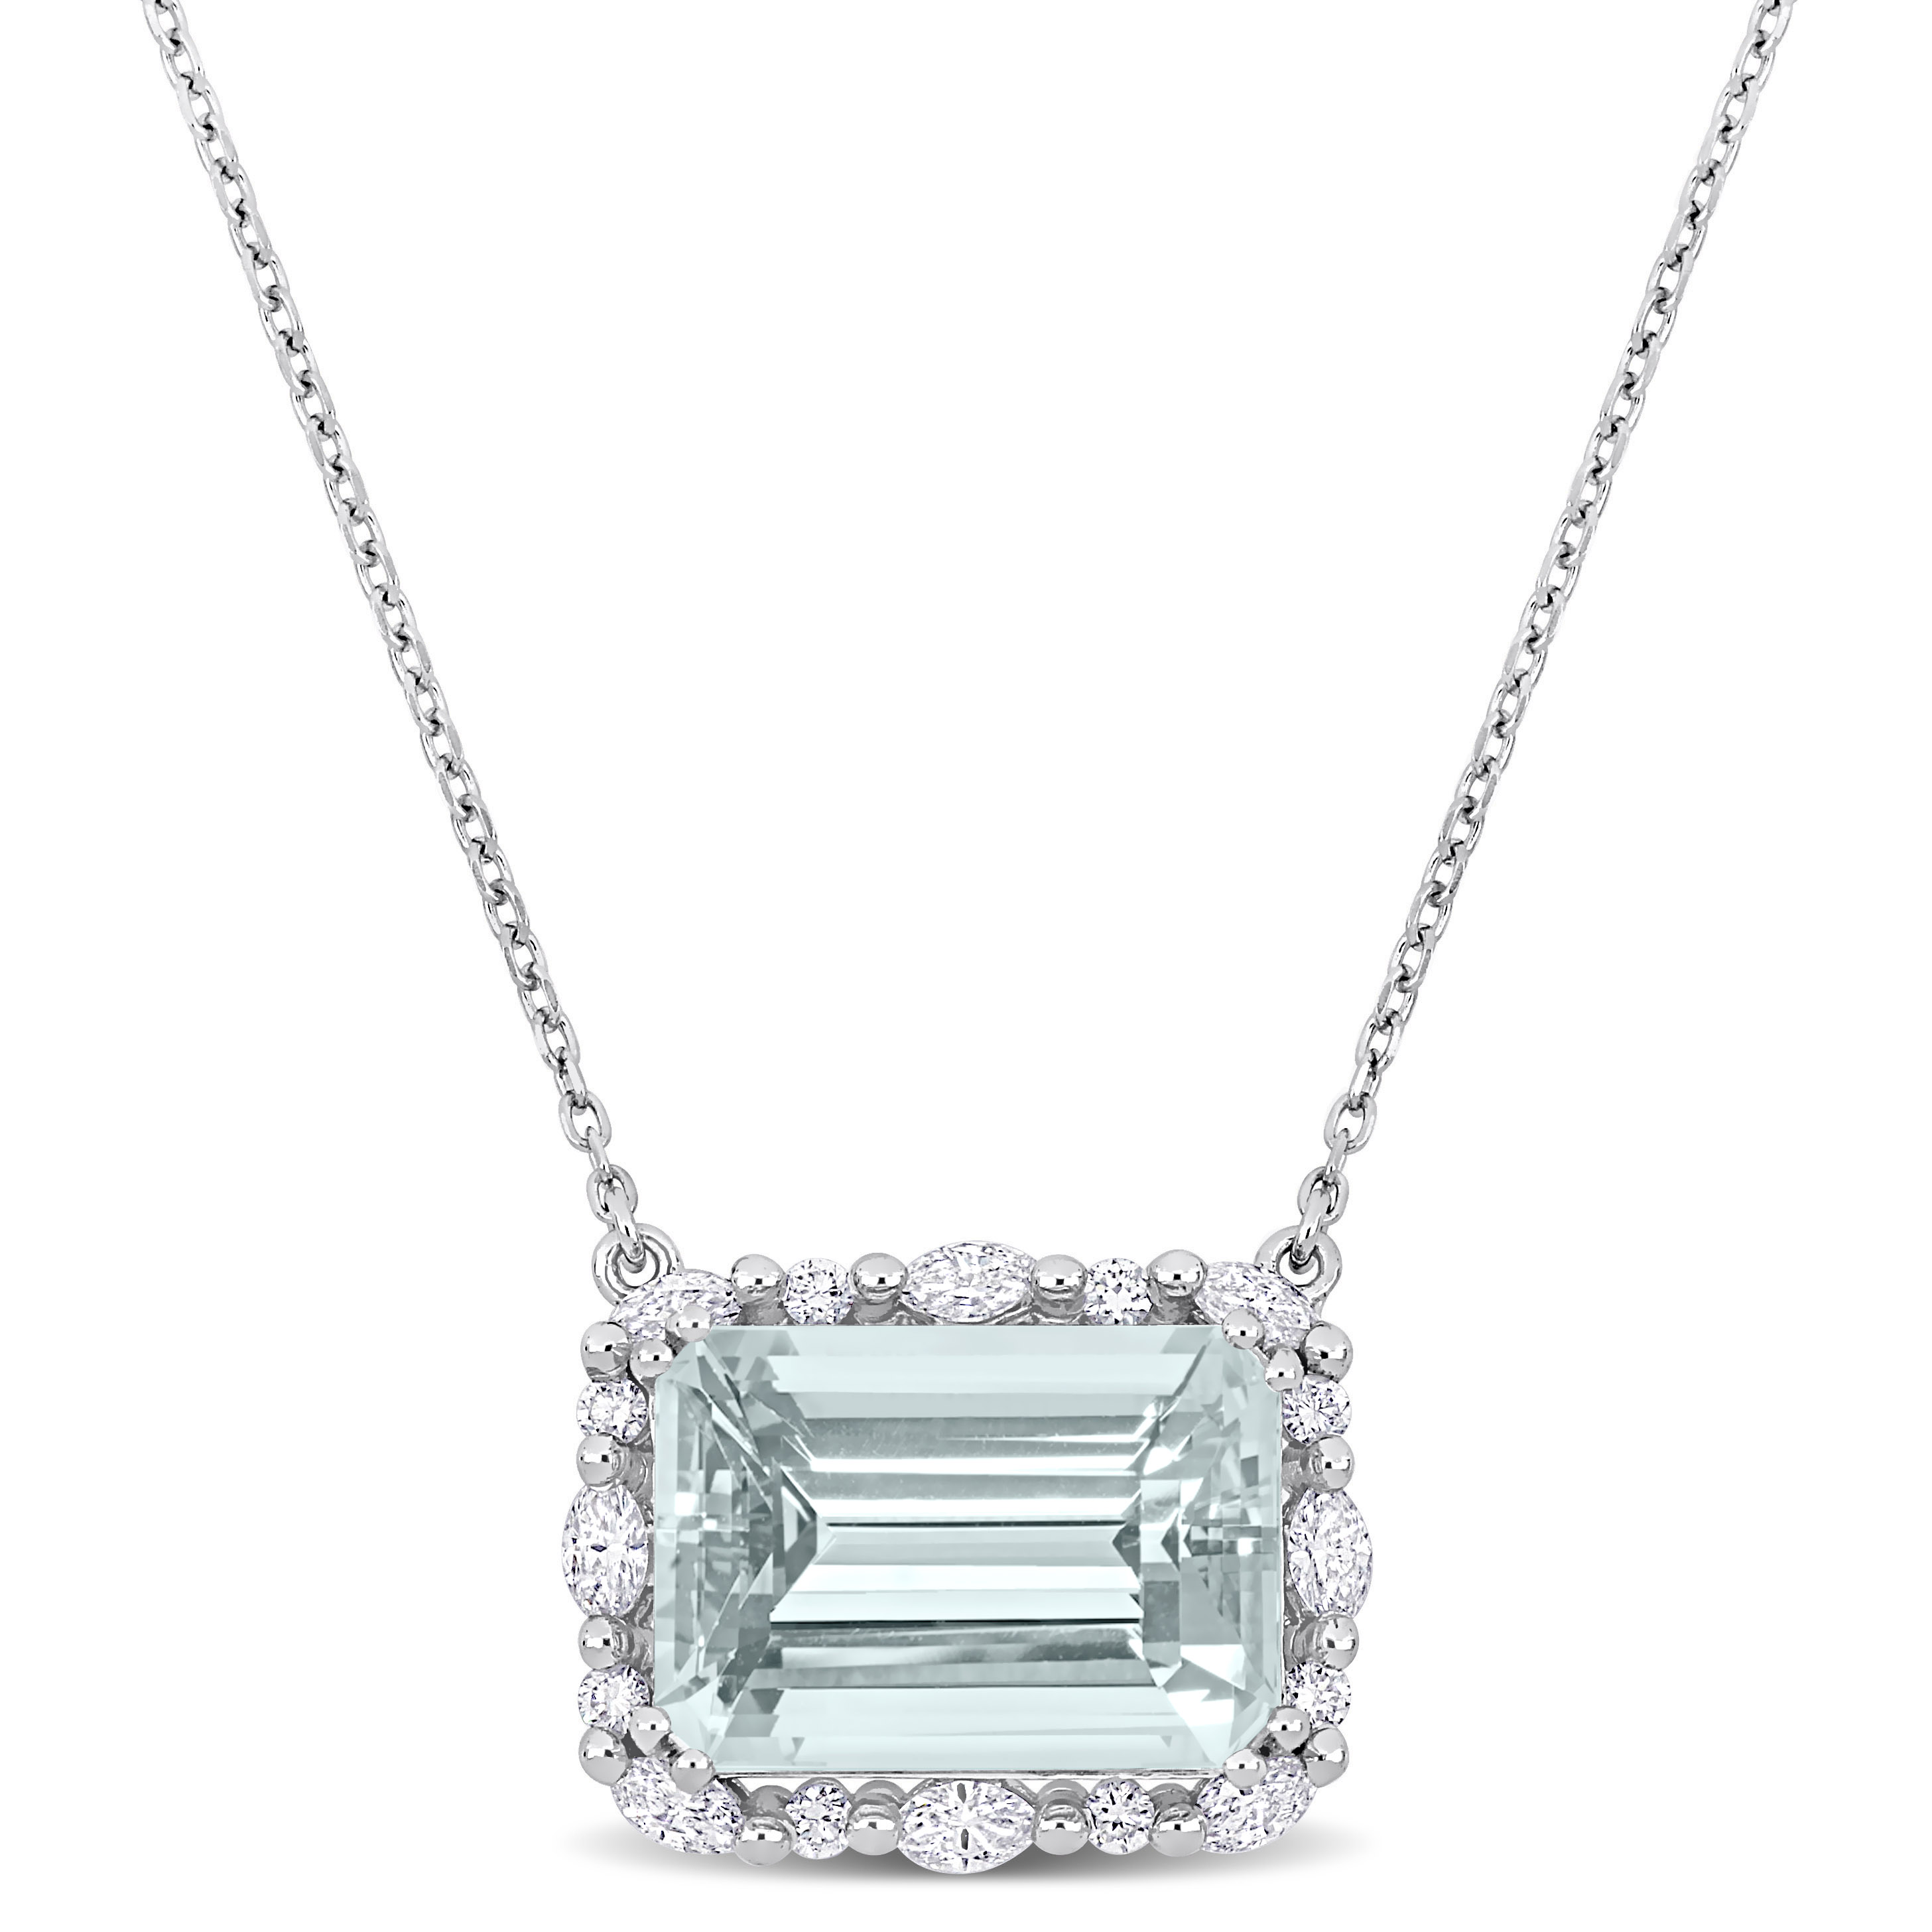 5 CT TGW Aquamarine and 5/8 CT TW Marquise and Round Diamond Halo Necklace in 14k White Gold - 16.5 in + 1.5 in Ext.